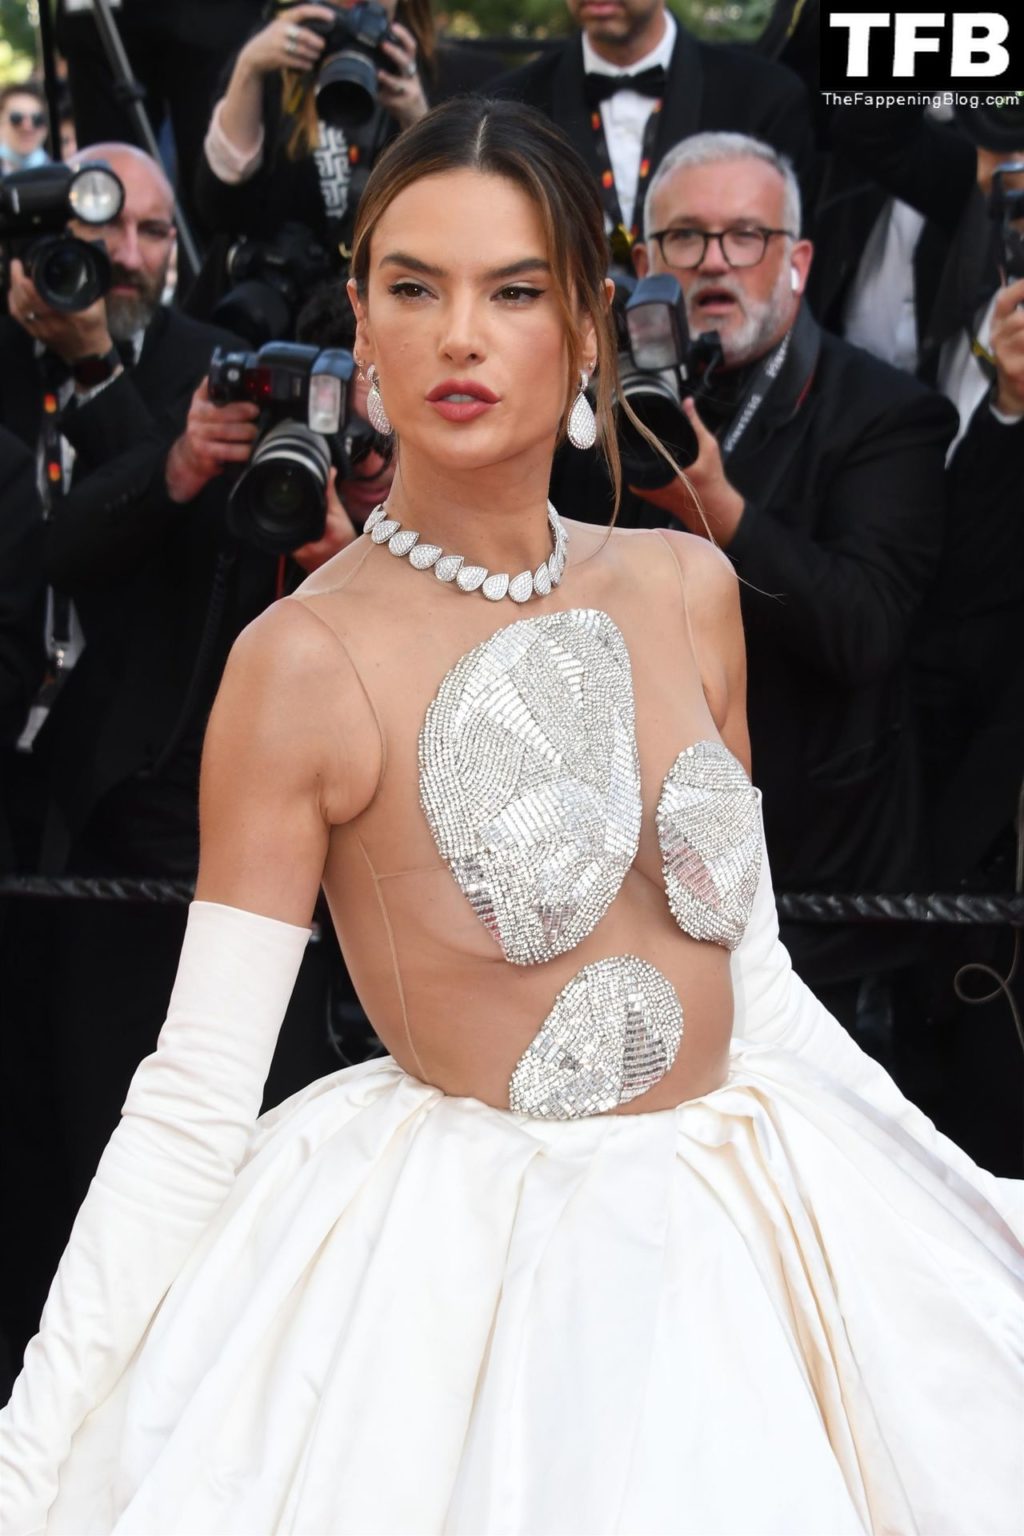 Alessandra Ambrosio Poses Braless as She Attends the Screening of “Armageddon Time” During the 75th Annual Cannes Film Festival (150 Photos)